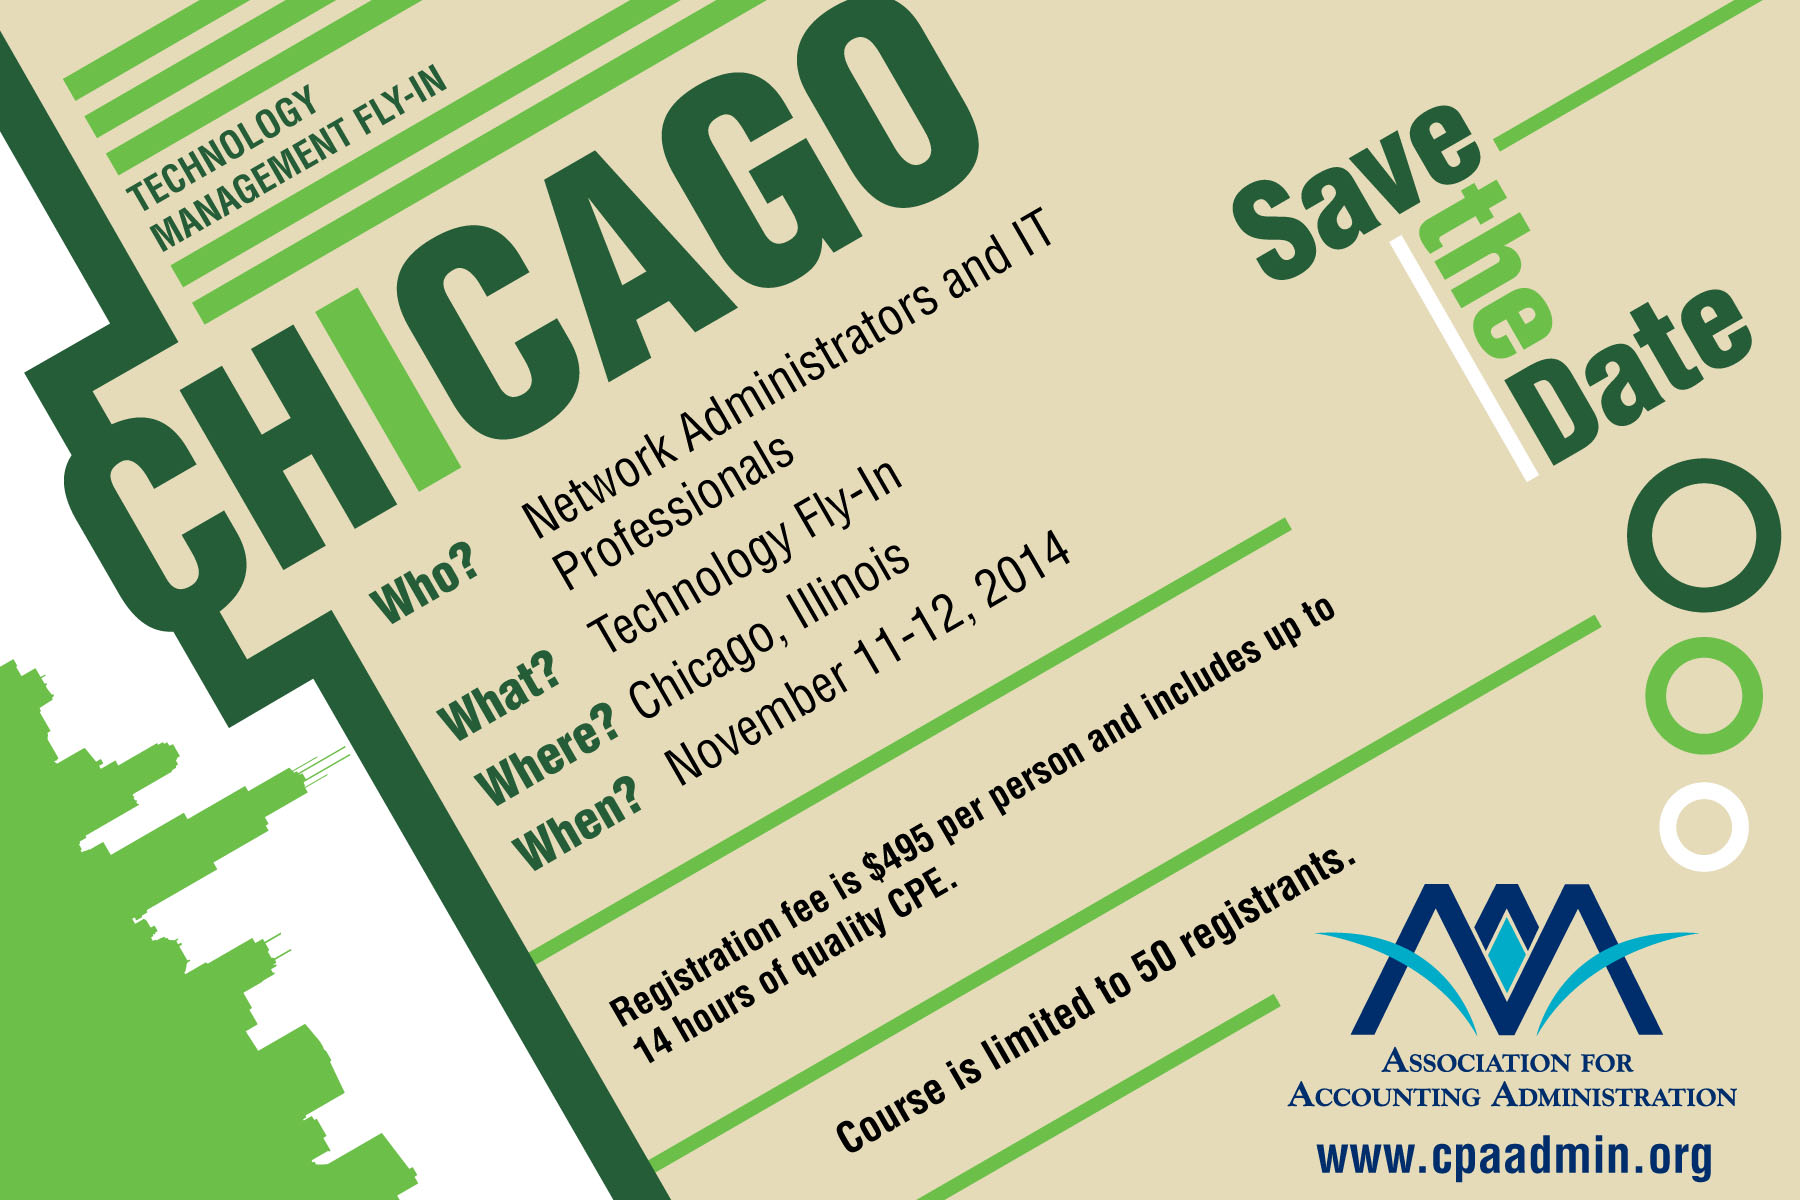 AAA 2014 Technology Fly-In Takes Place November 11-12, 2014